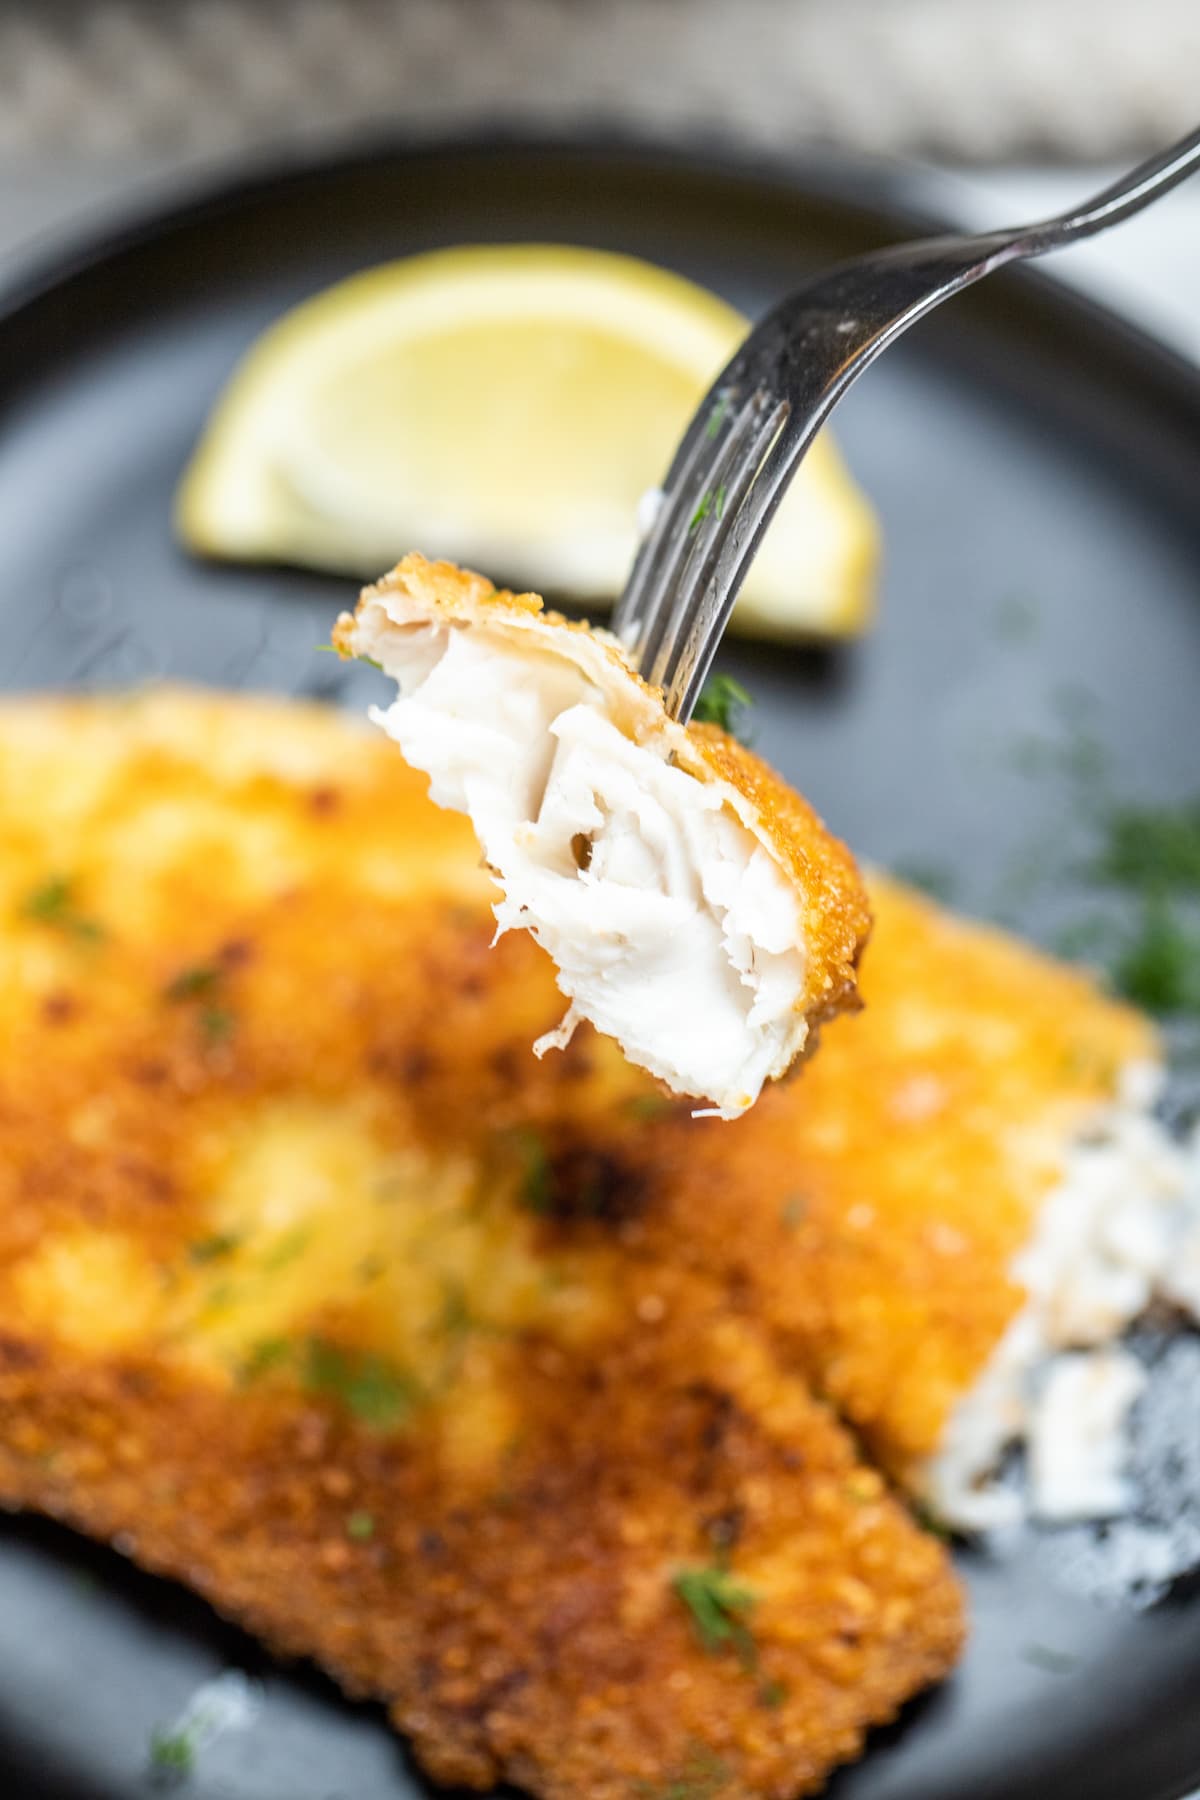 A fork holding a piece of tilapia over a plate with a piece of breaded tilapia and a lemon wedge.